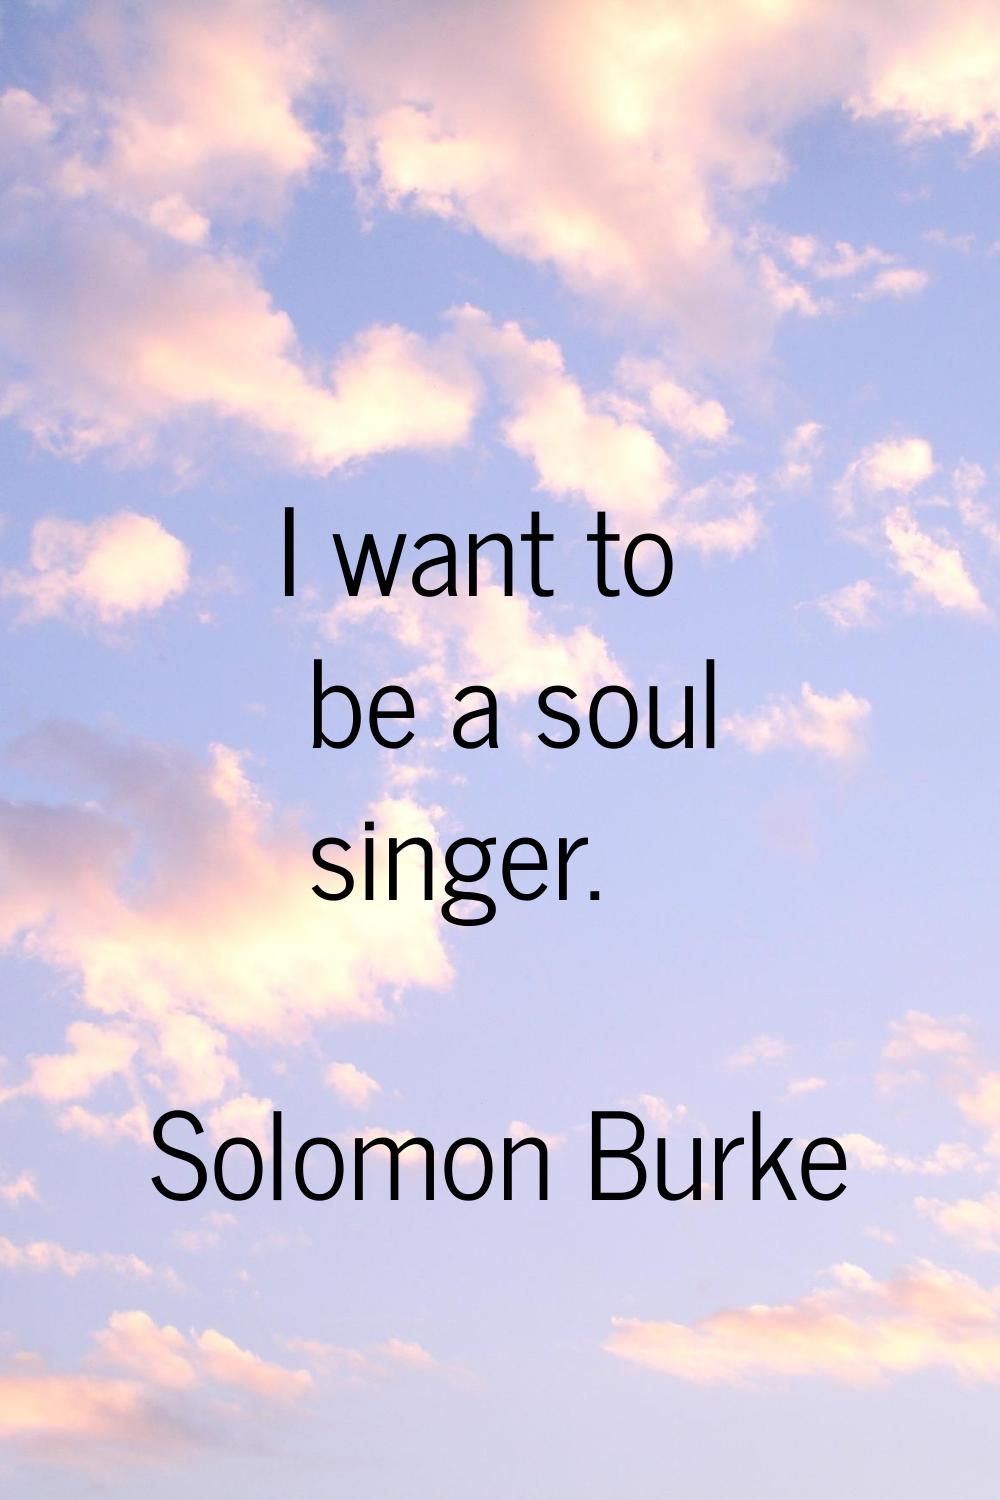 I want to be a soul singer.